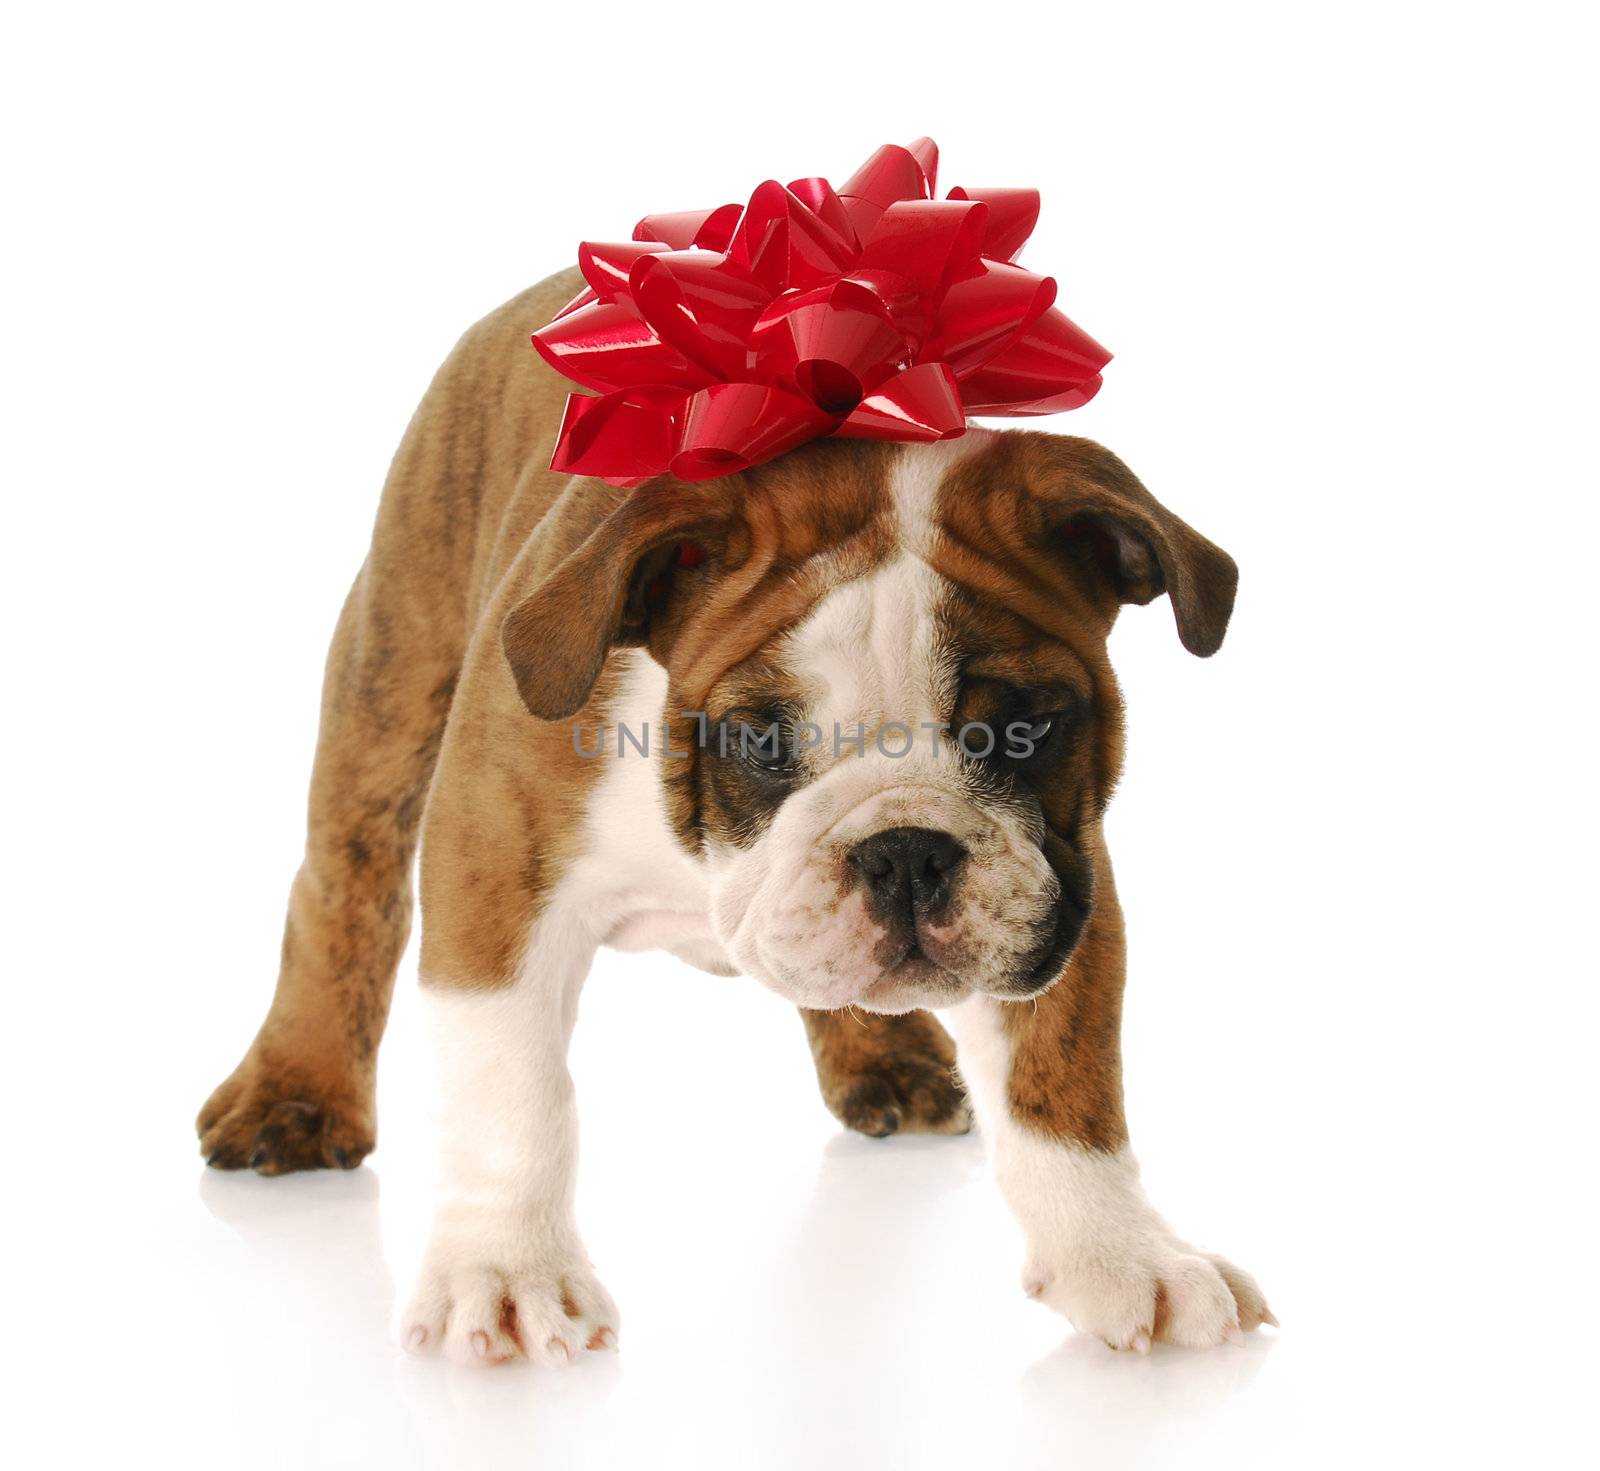 adorable english bulldog with red bow on his head standing